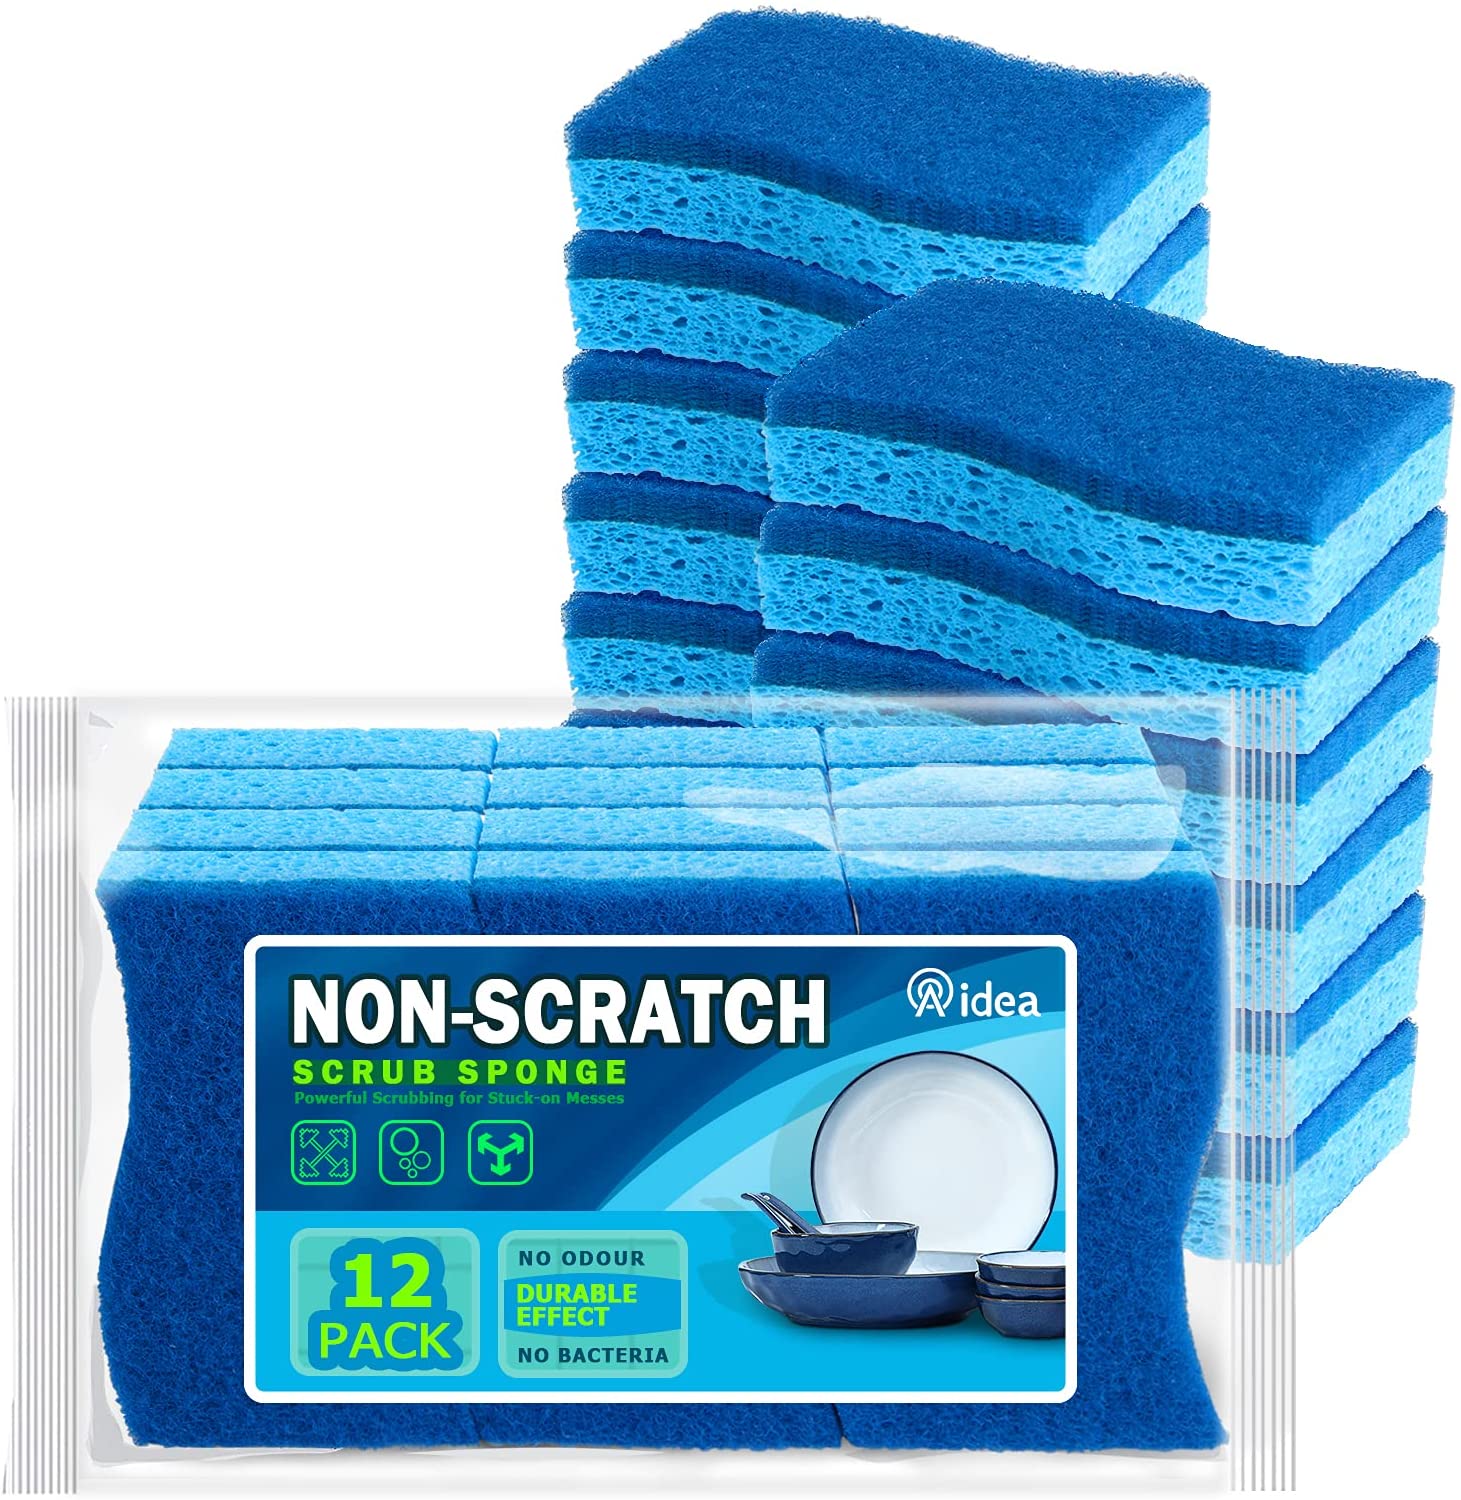 Scotch-Brite Zero Scratch Scrub Sponges for Cleaning Kitchen, Bathroom, and  Household, Non-Scratch Sponges Safe for Non-Stick Cookware, 6 Scrubbing